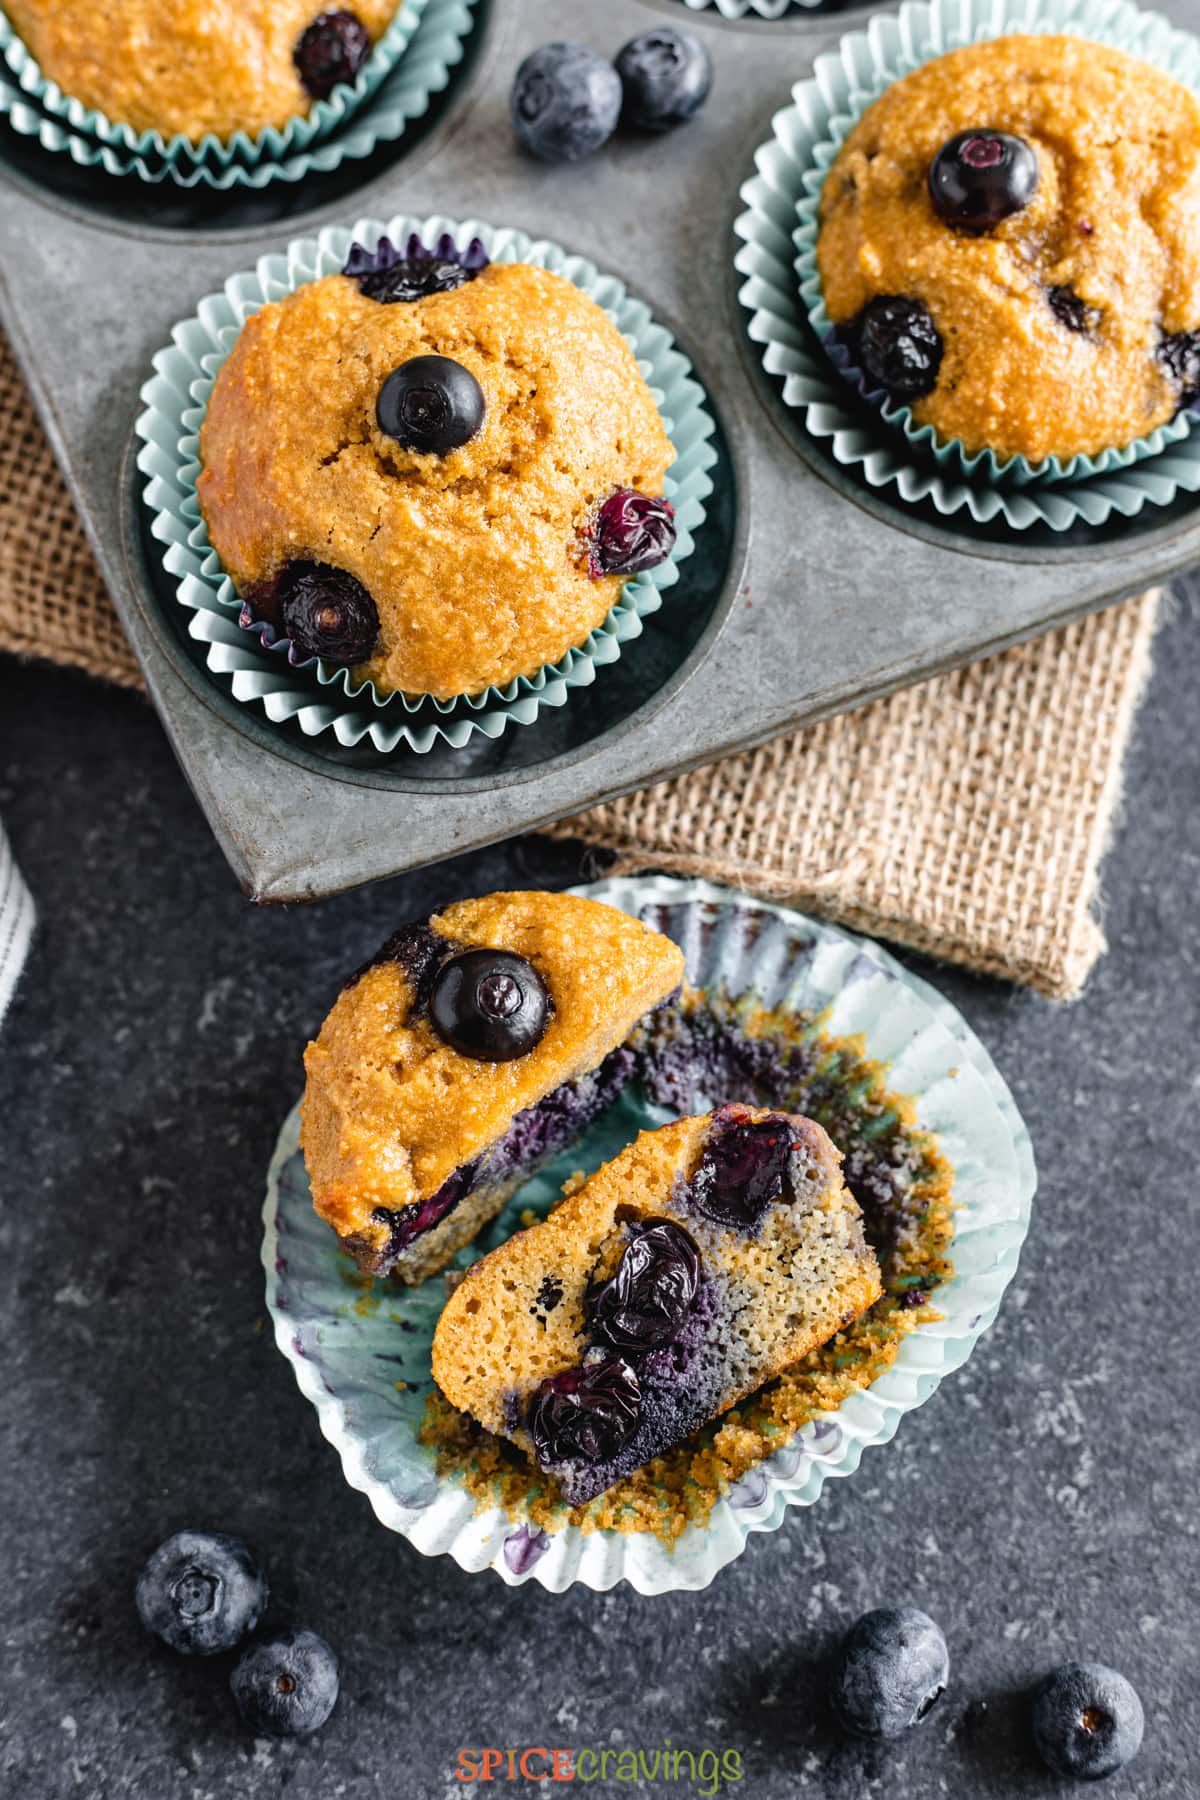 Blueberry Muffin split in half next to tray of almond flour muffins